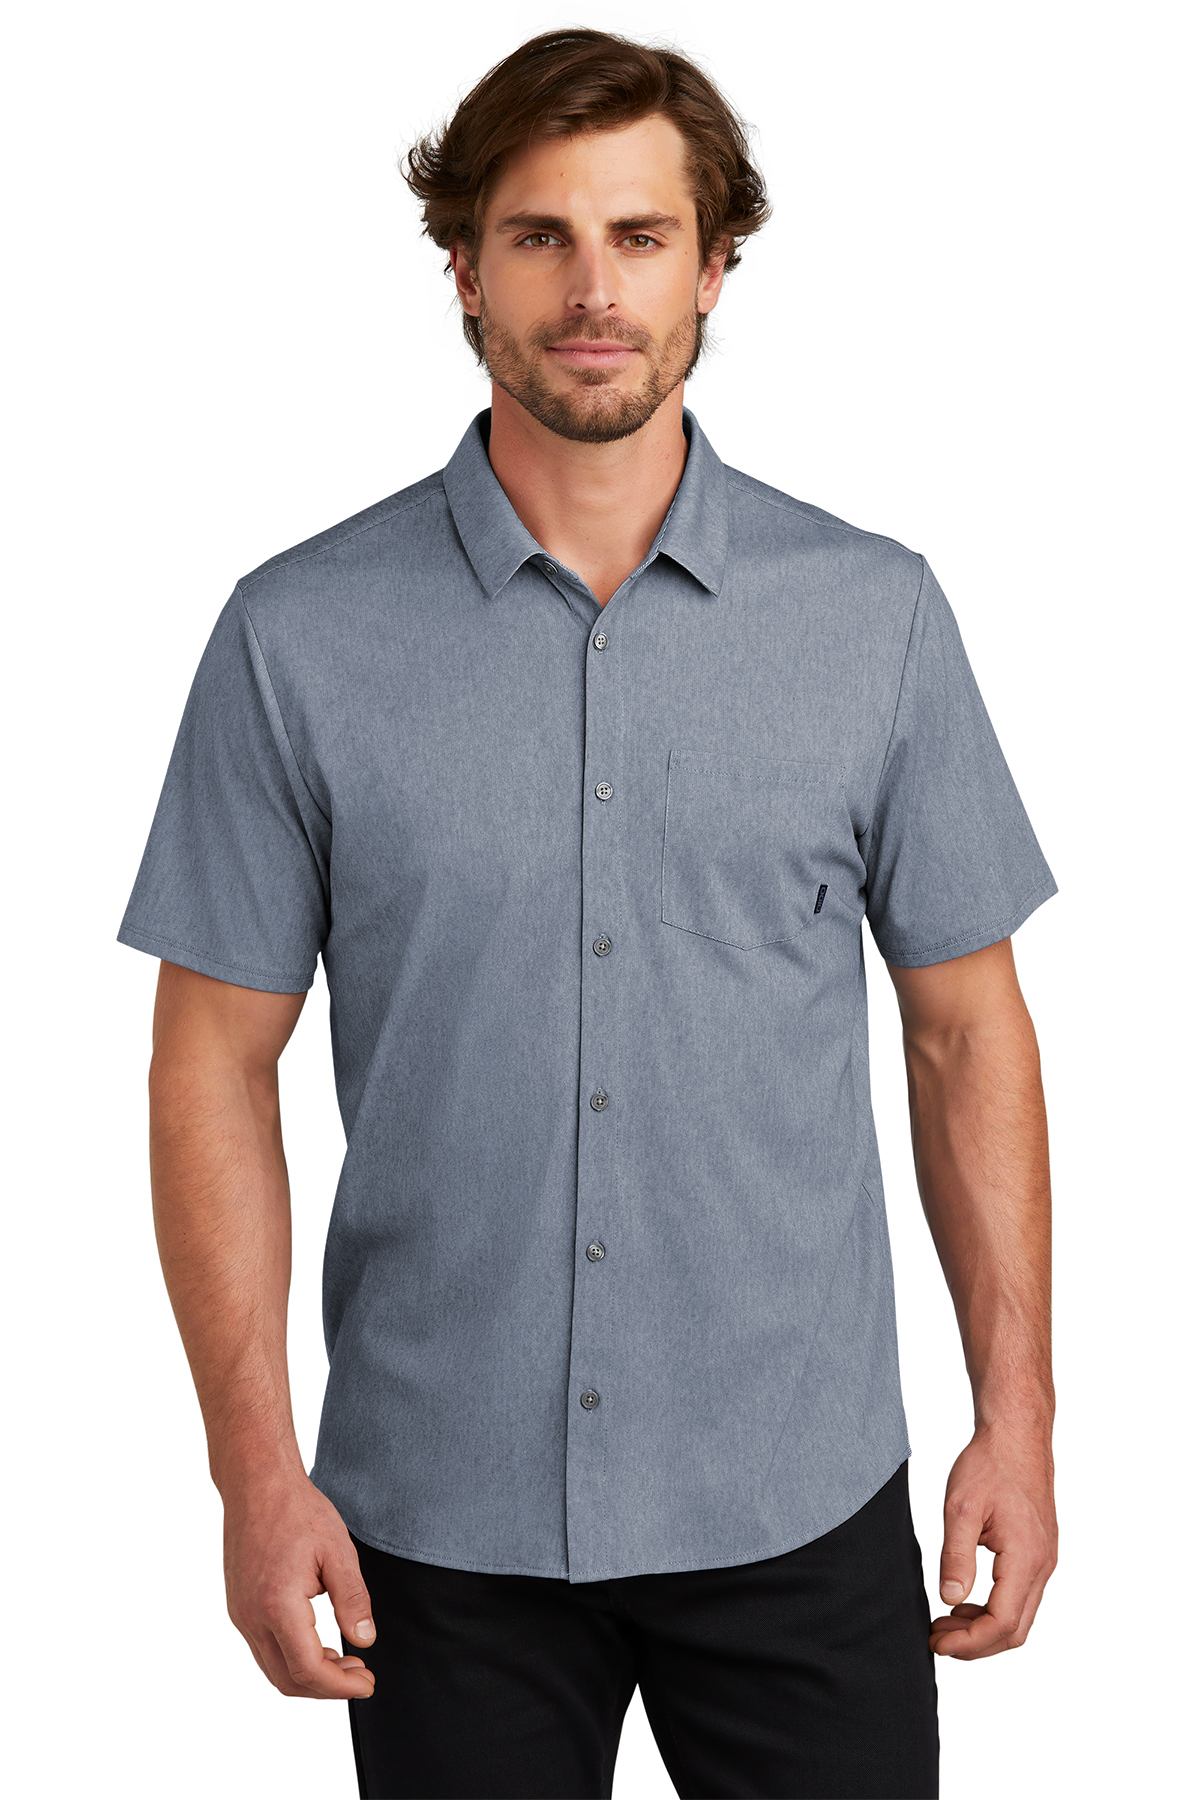 OGIO Extend Short Sleeve Button-Up | Product | SanMar